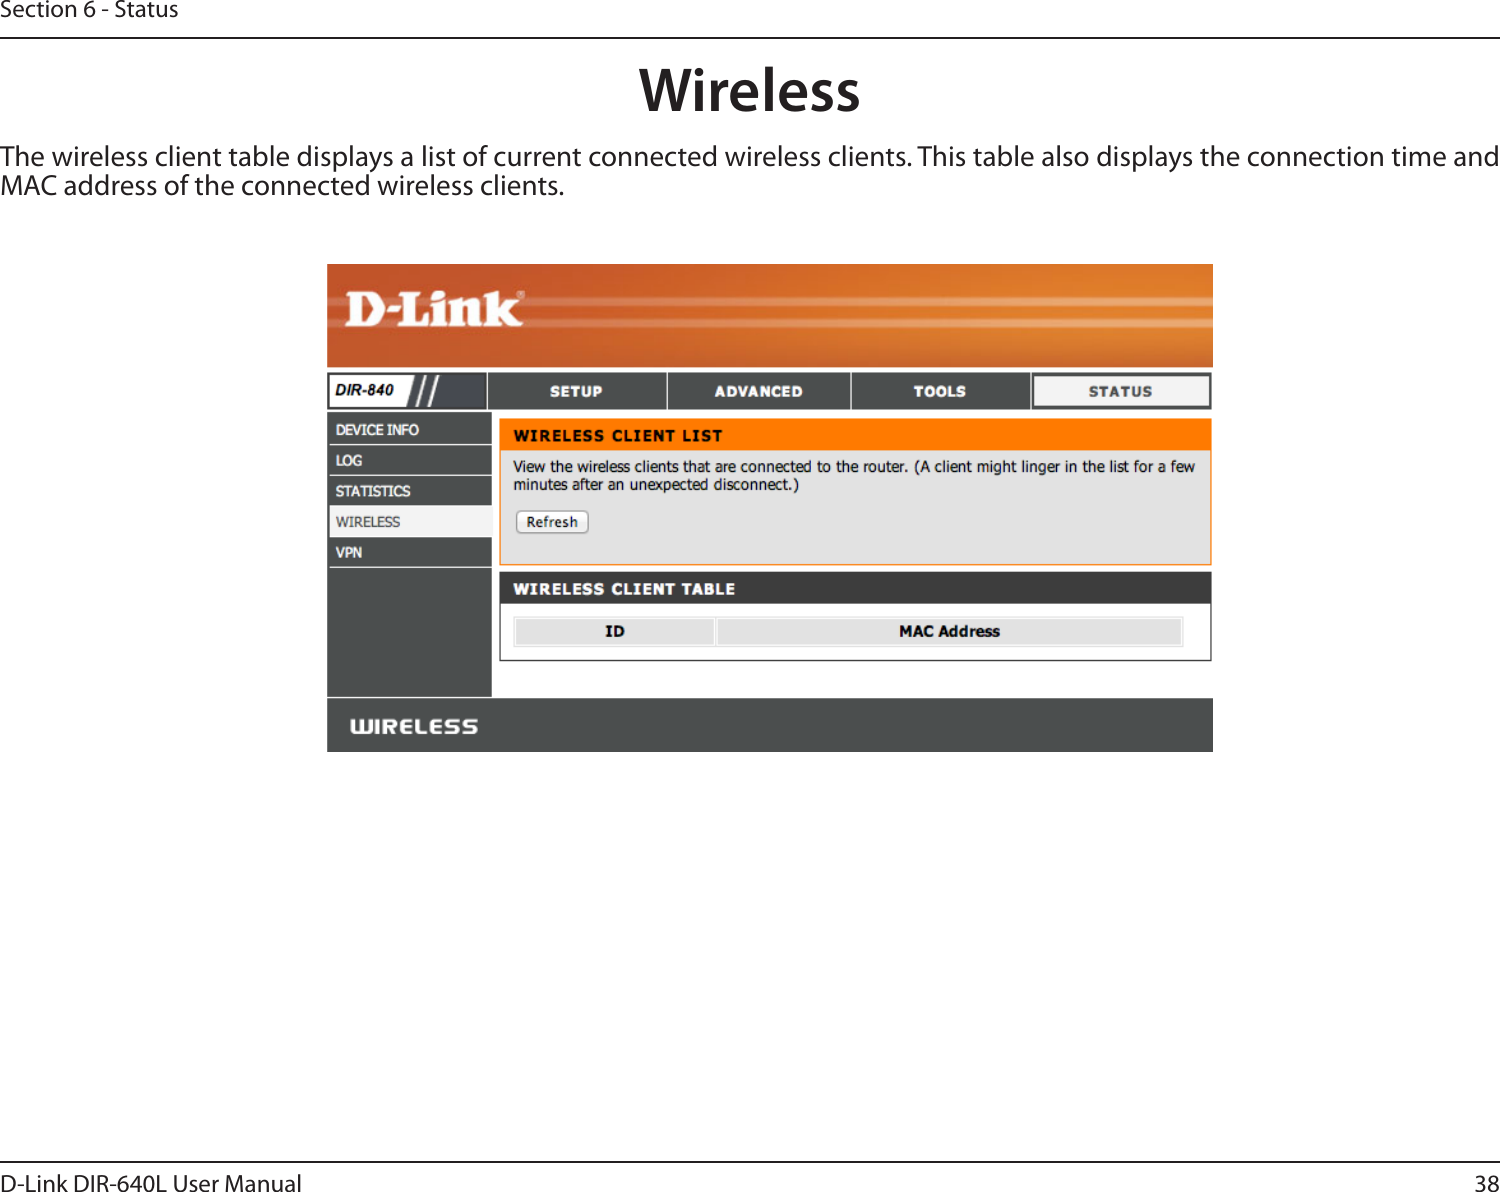 38D-Link DIR-640L User ManualSection 6 - StatusThe wireless client table displays a list of current connected wireless clients. This table also displays the connection time and MAC address of the connected wireless clients.Wireless